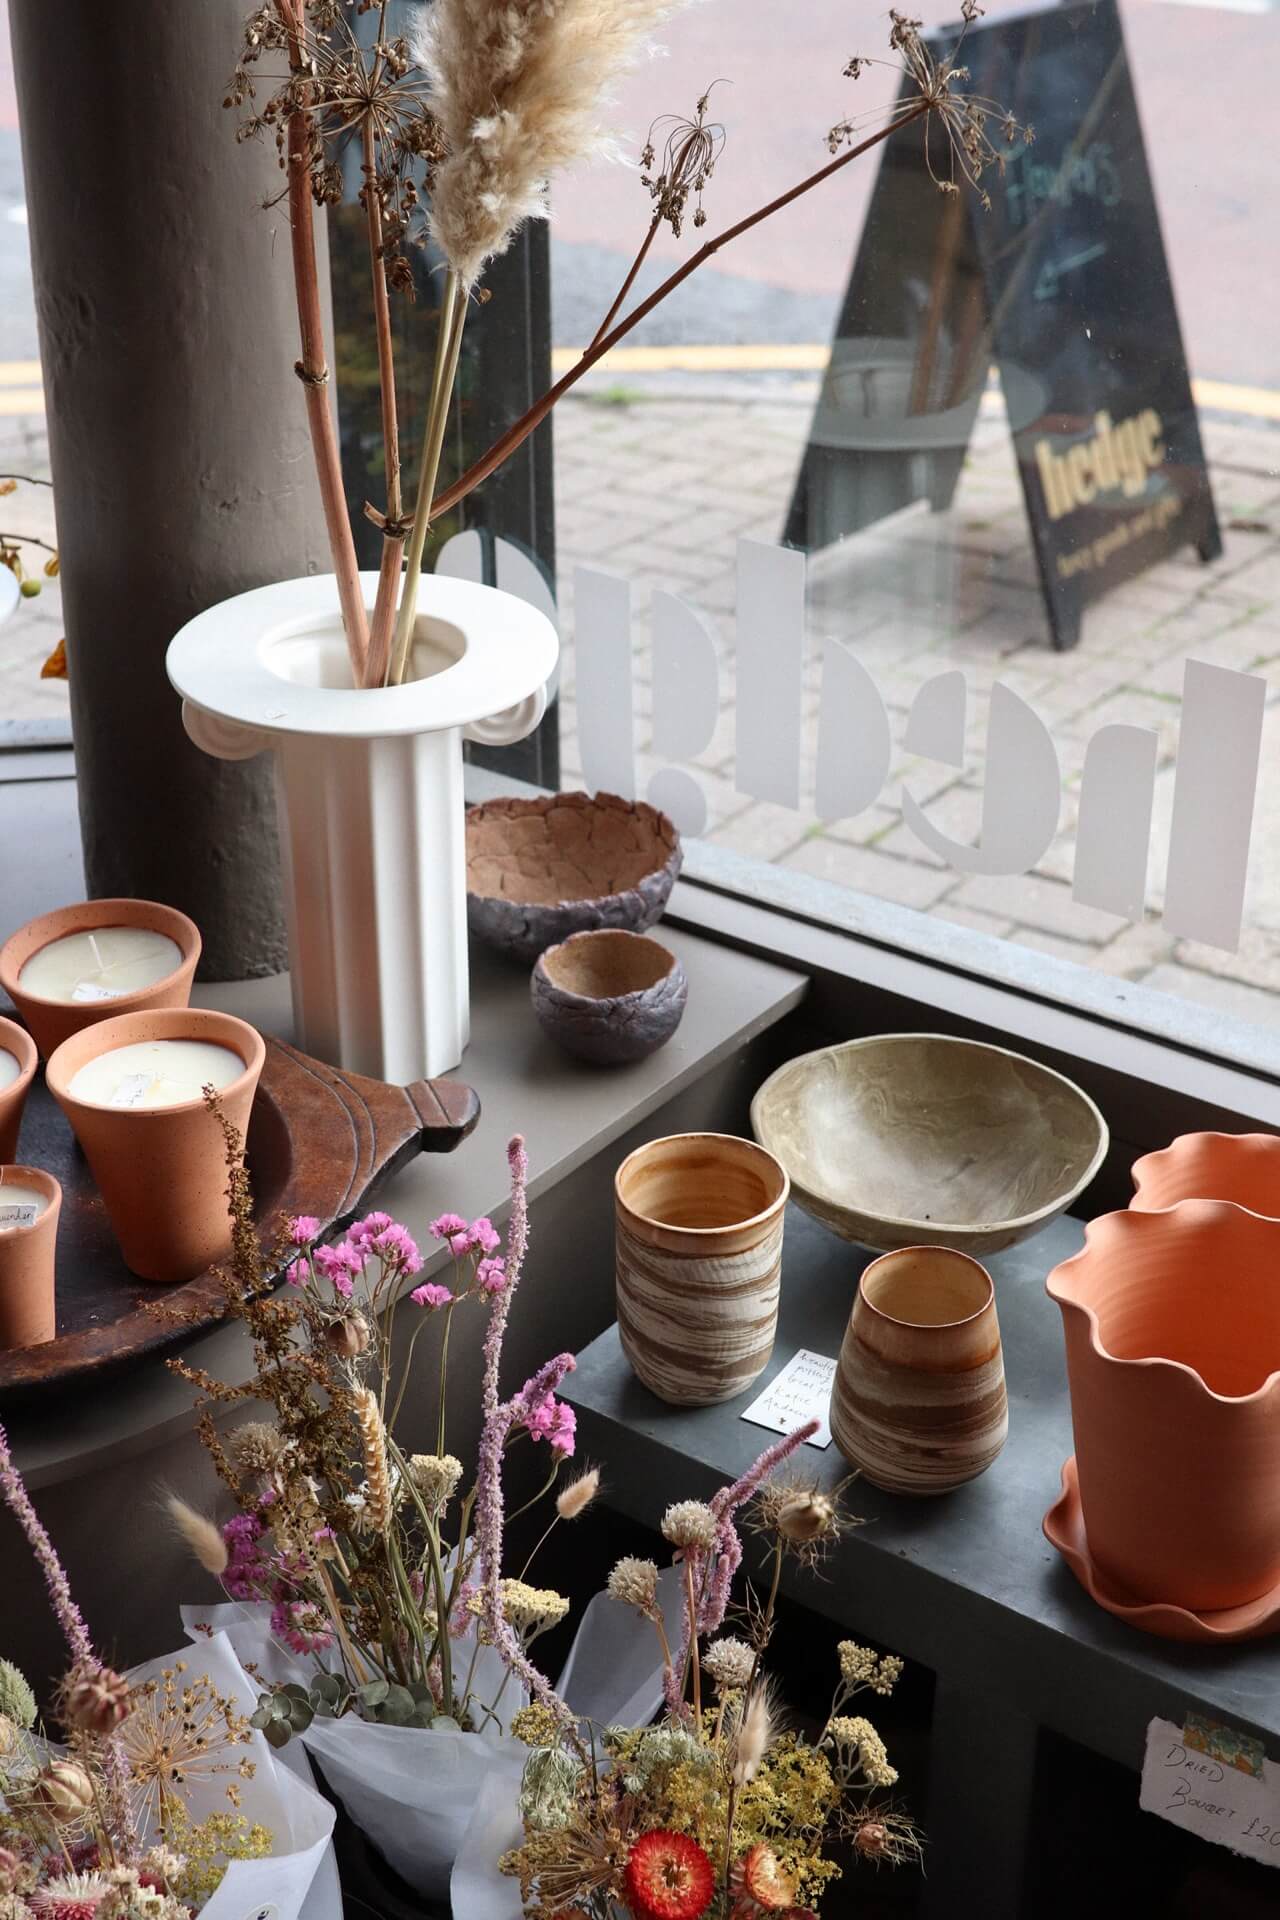 Bohemian interiors and homeware including terracotta pots and vases inside independent flower shop Hedge, Birmingham